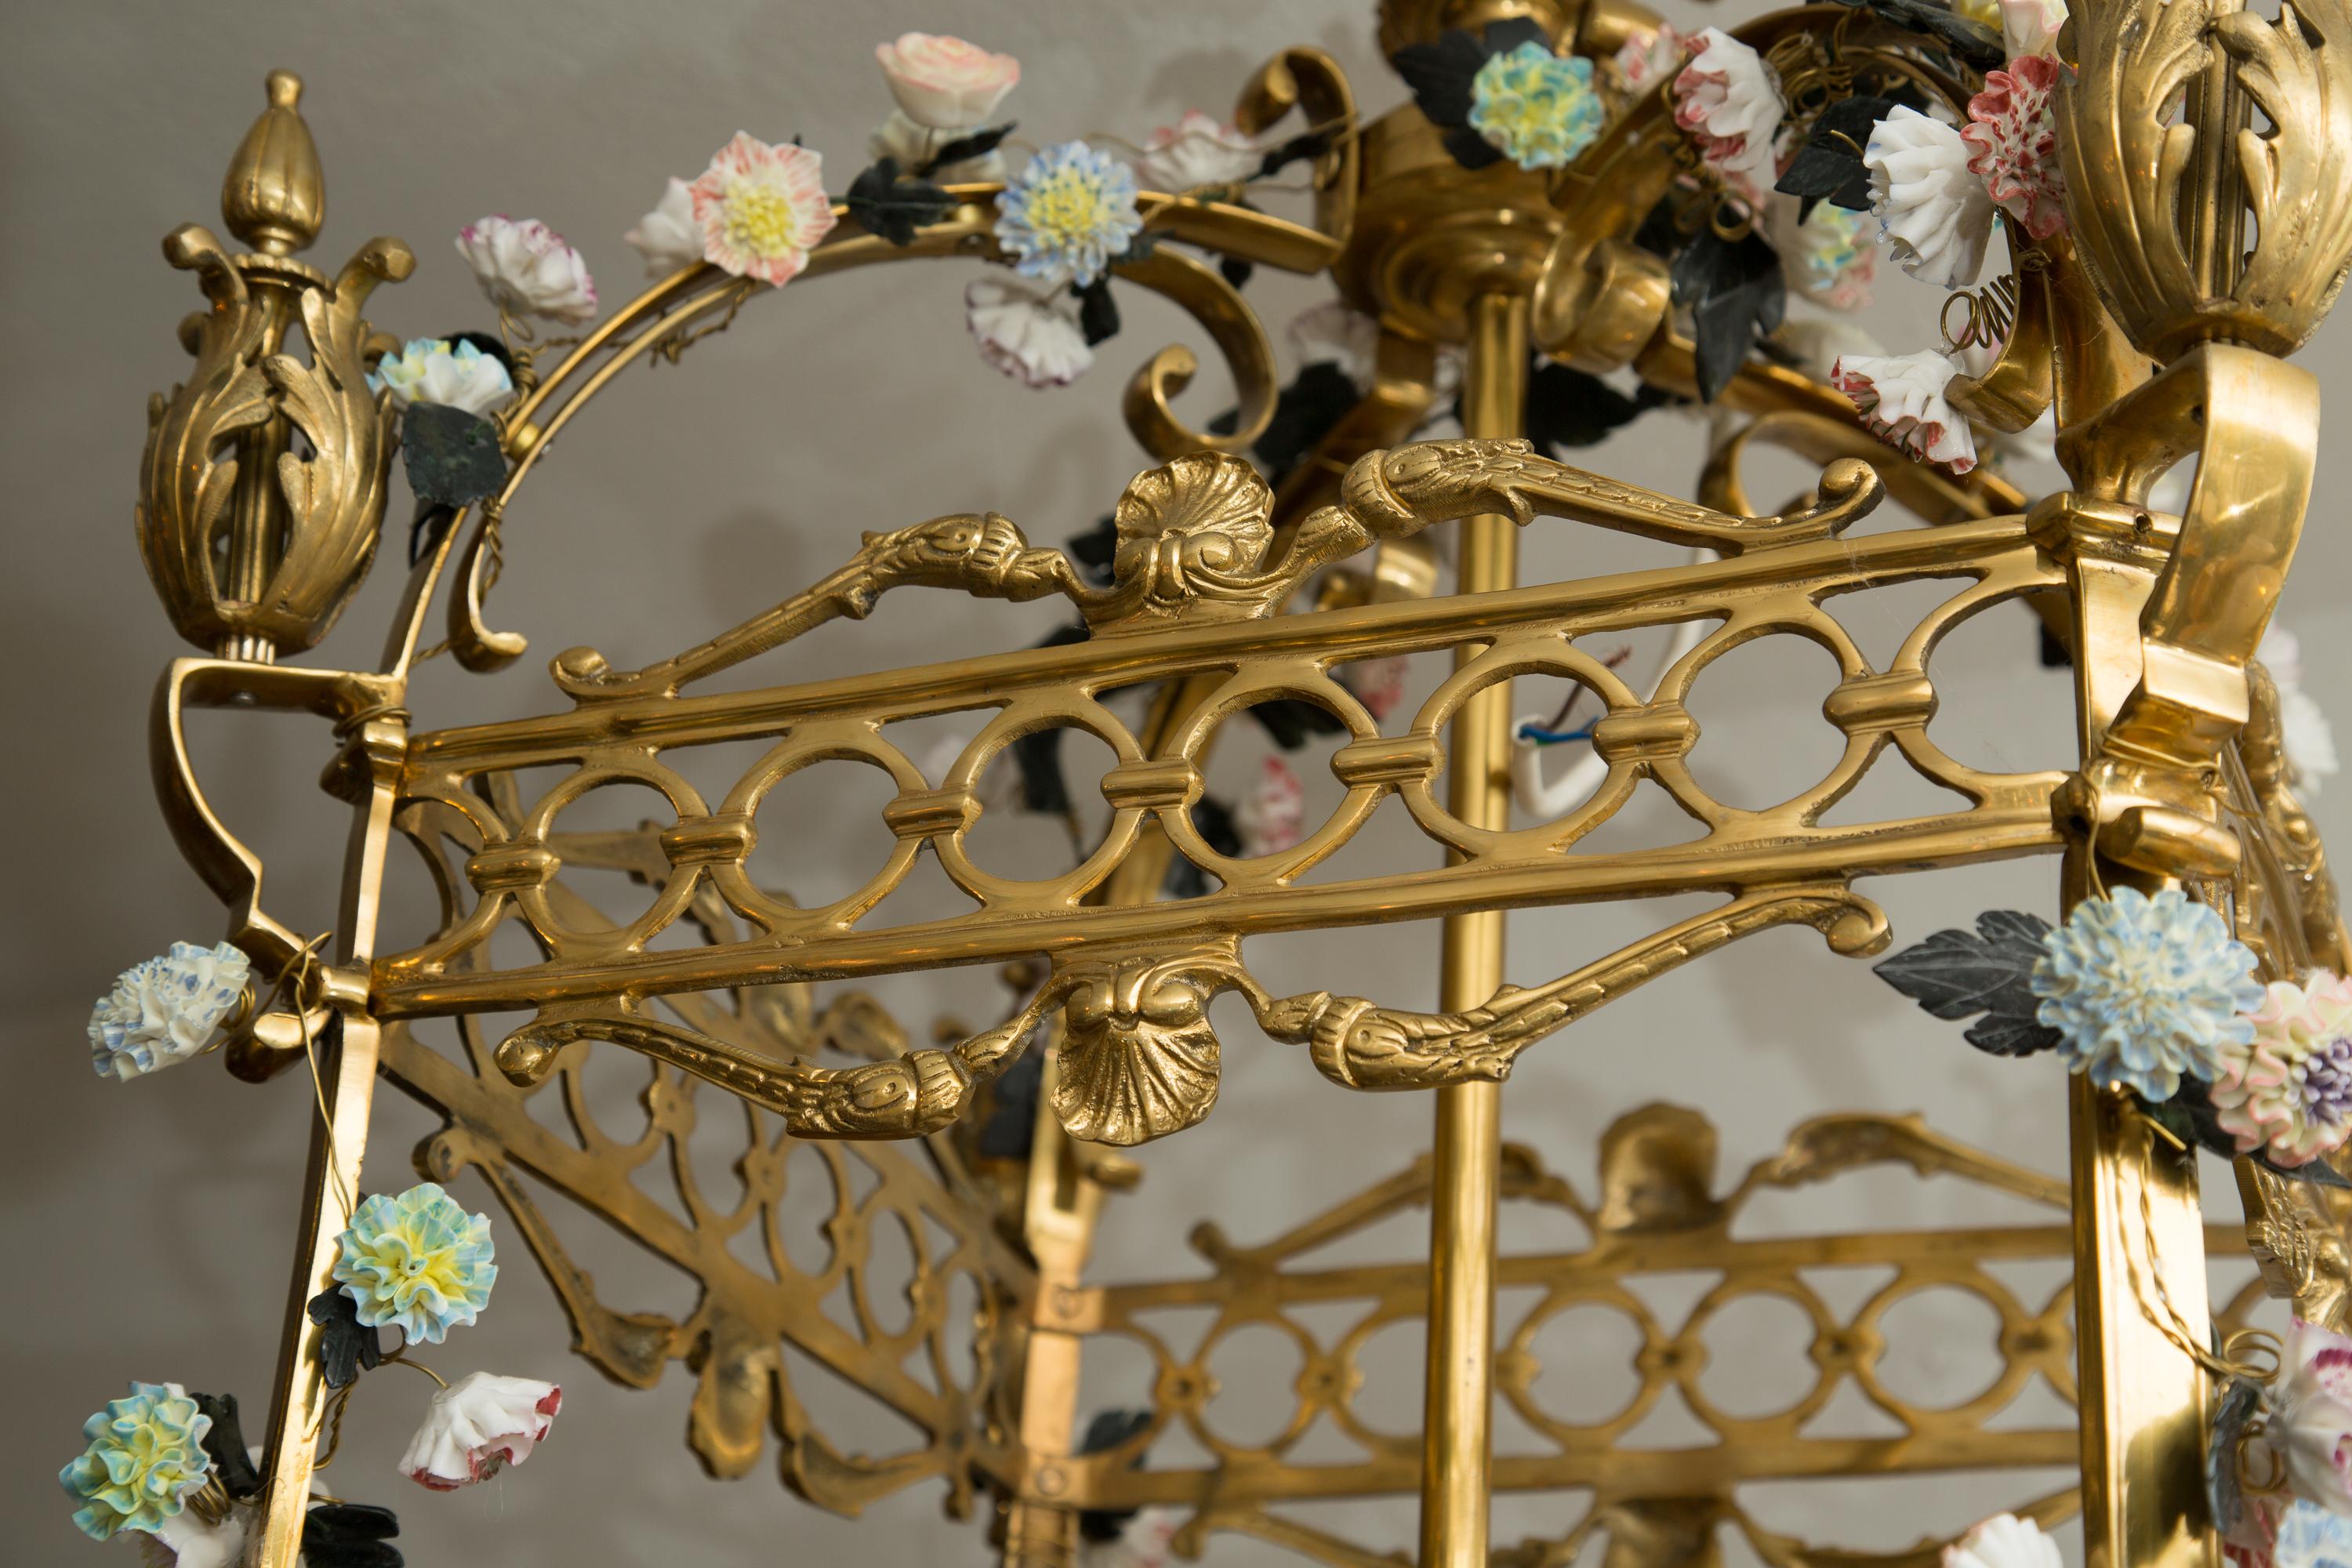 This is a very romantic neoclassical style gilt bronze lantern-form chandelier-encrusted overall with a plethora of multicolored porcelain flower heads, early 20th century.